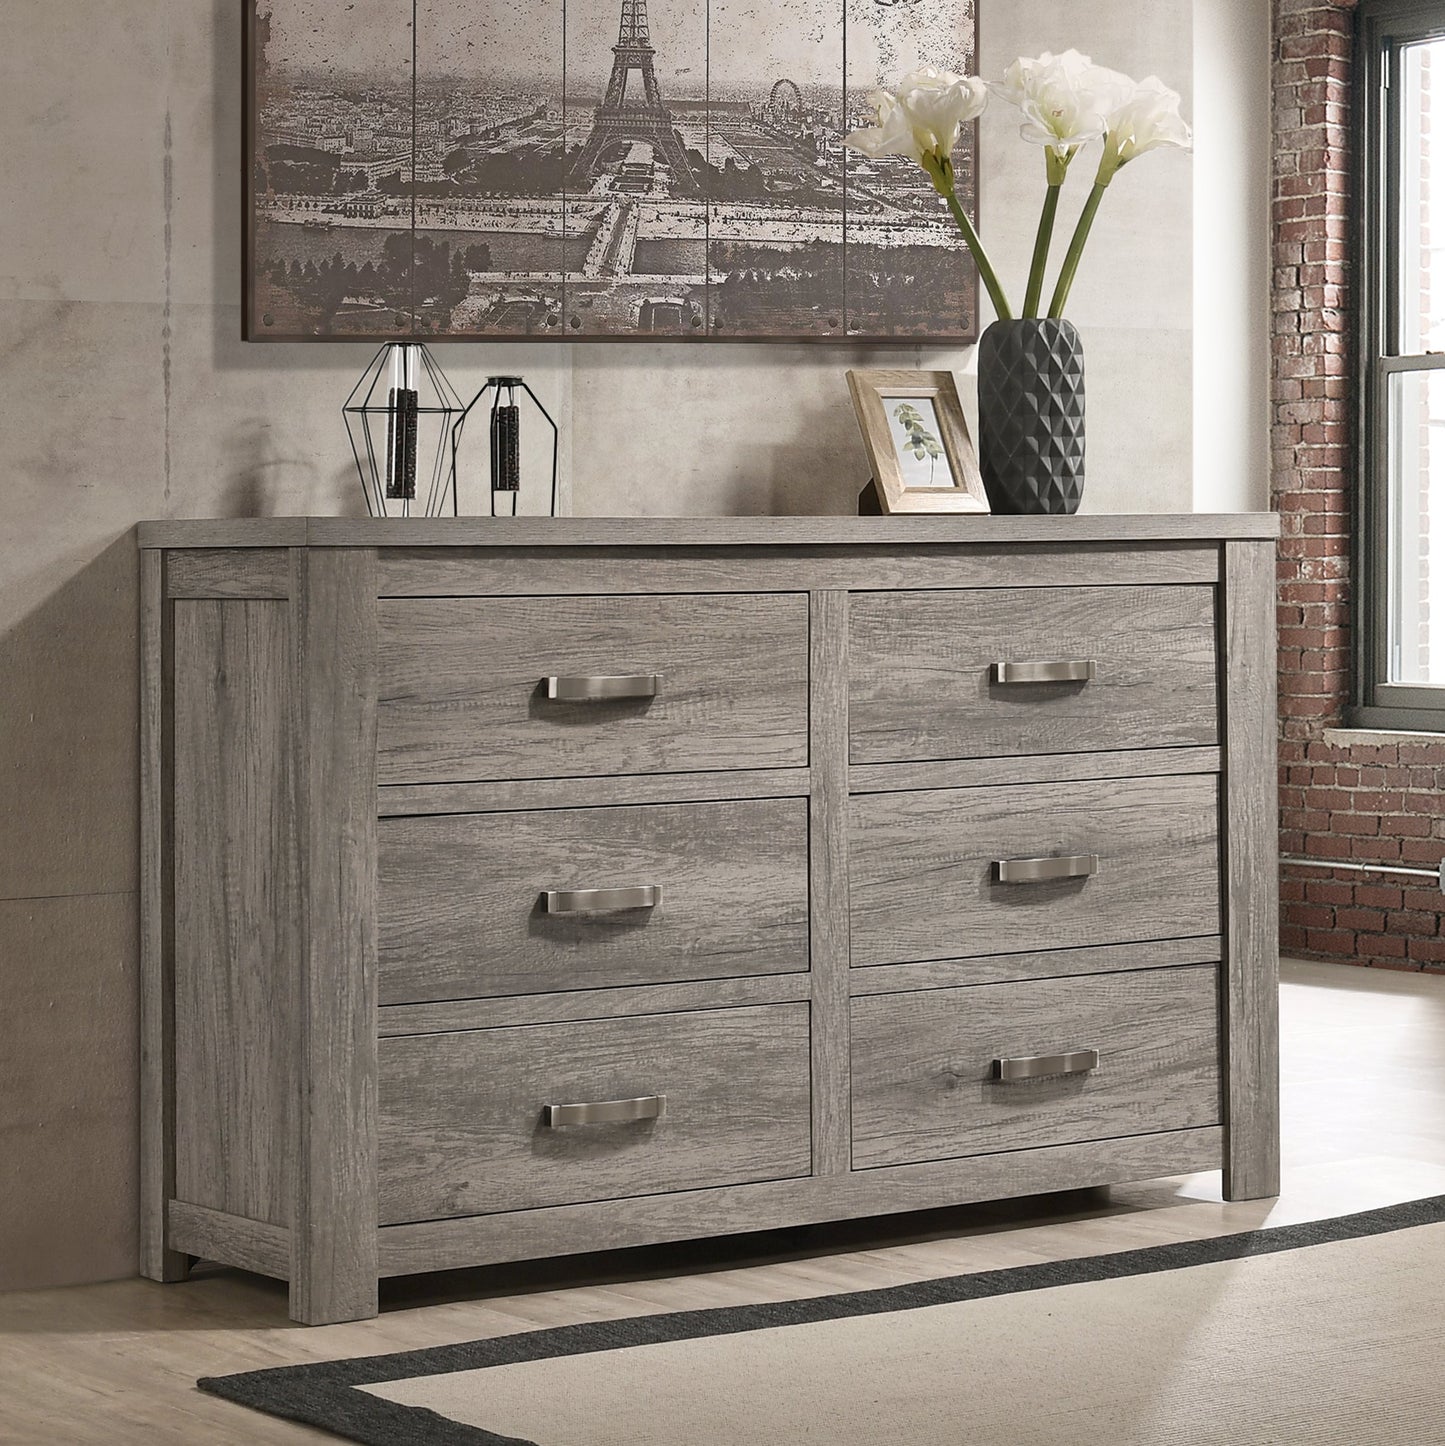 Floren Contemporary Weathered Gray Wood 6-Drawer Dresser with Mirror